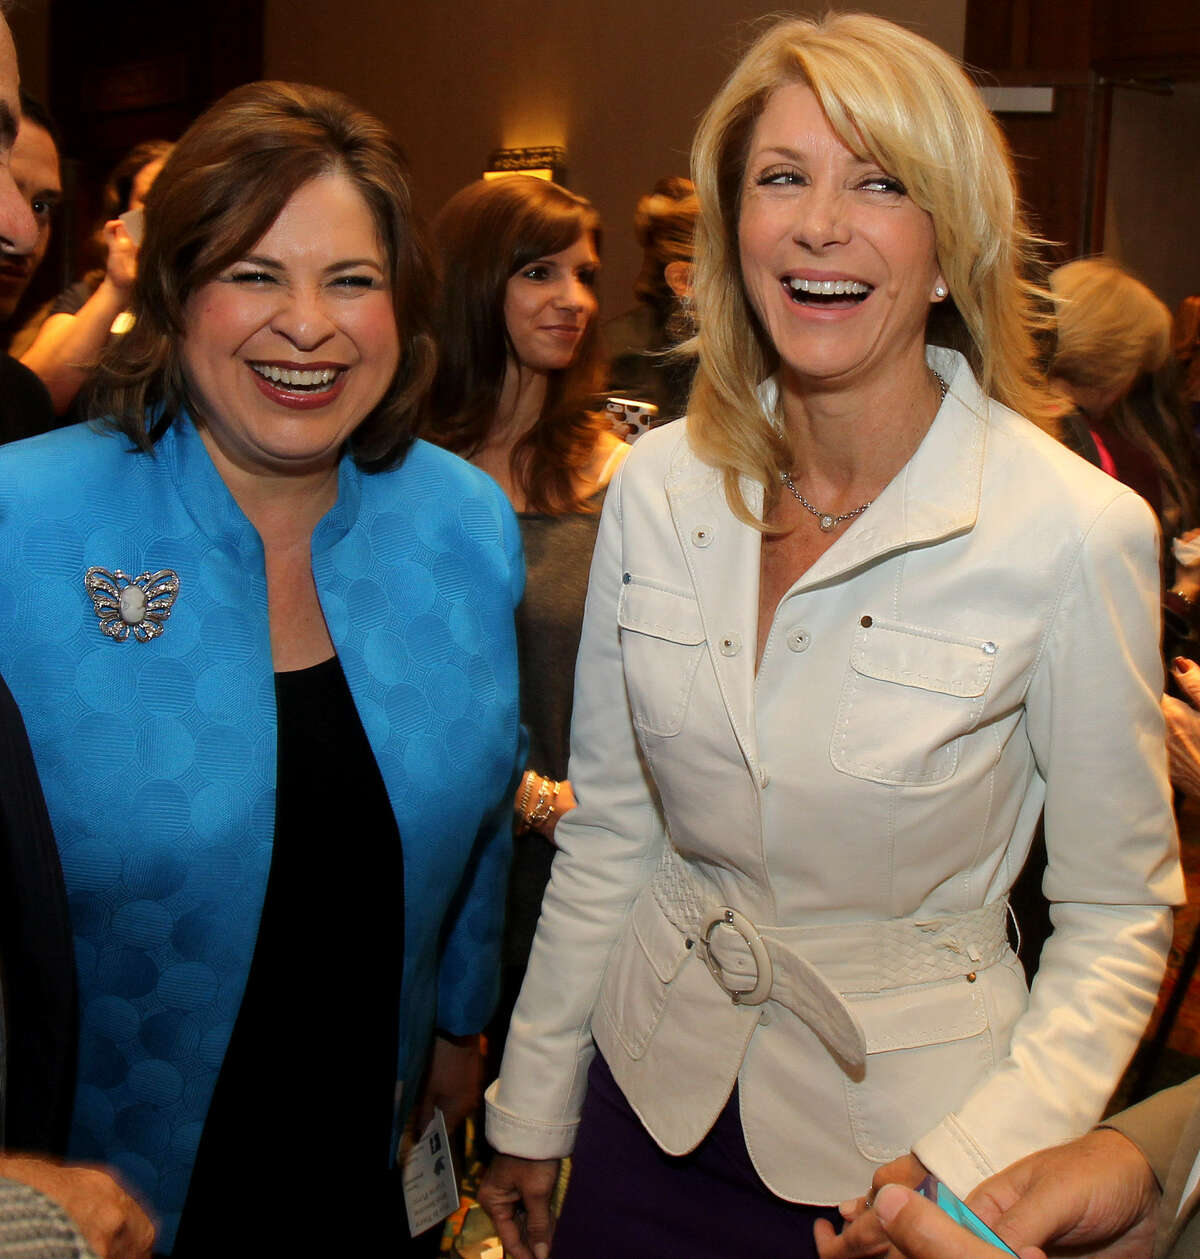 State Sen. Leticia Van de Putte rushed off a Houston stage Thursday evening to assist a woman who had fainted during a speech by state Sen. Wendy Davis. Get to know Leticia Van de Putte.Van de Putte (left) and Davis greeted supporters at a luncheon in San Antonio earlier this month.